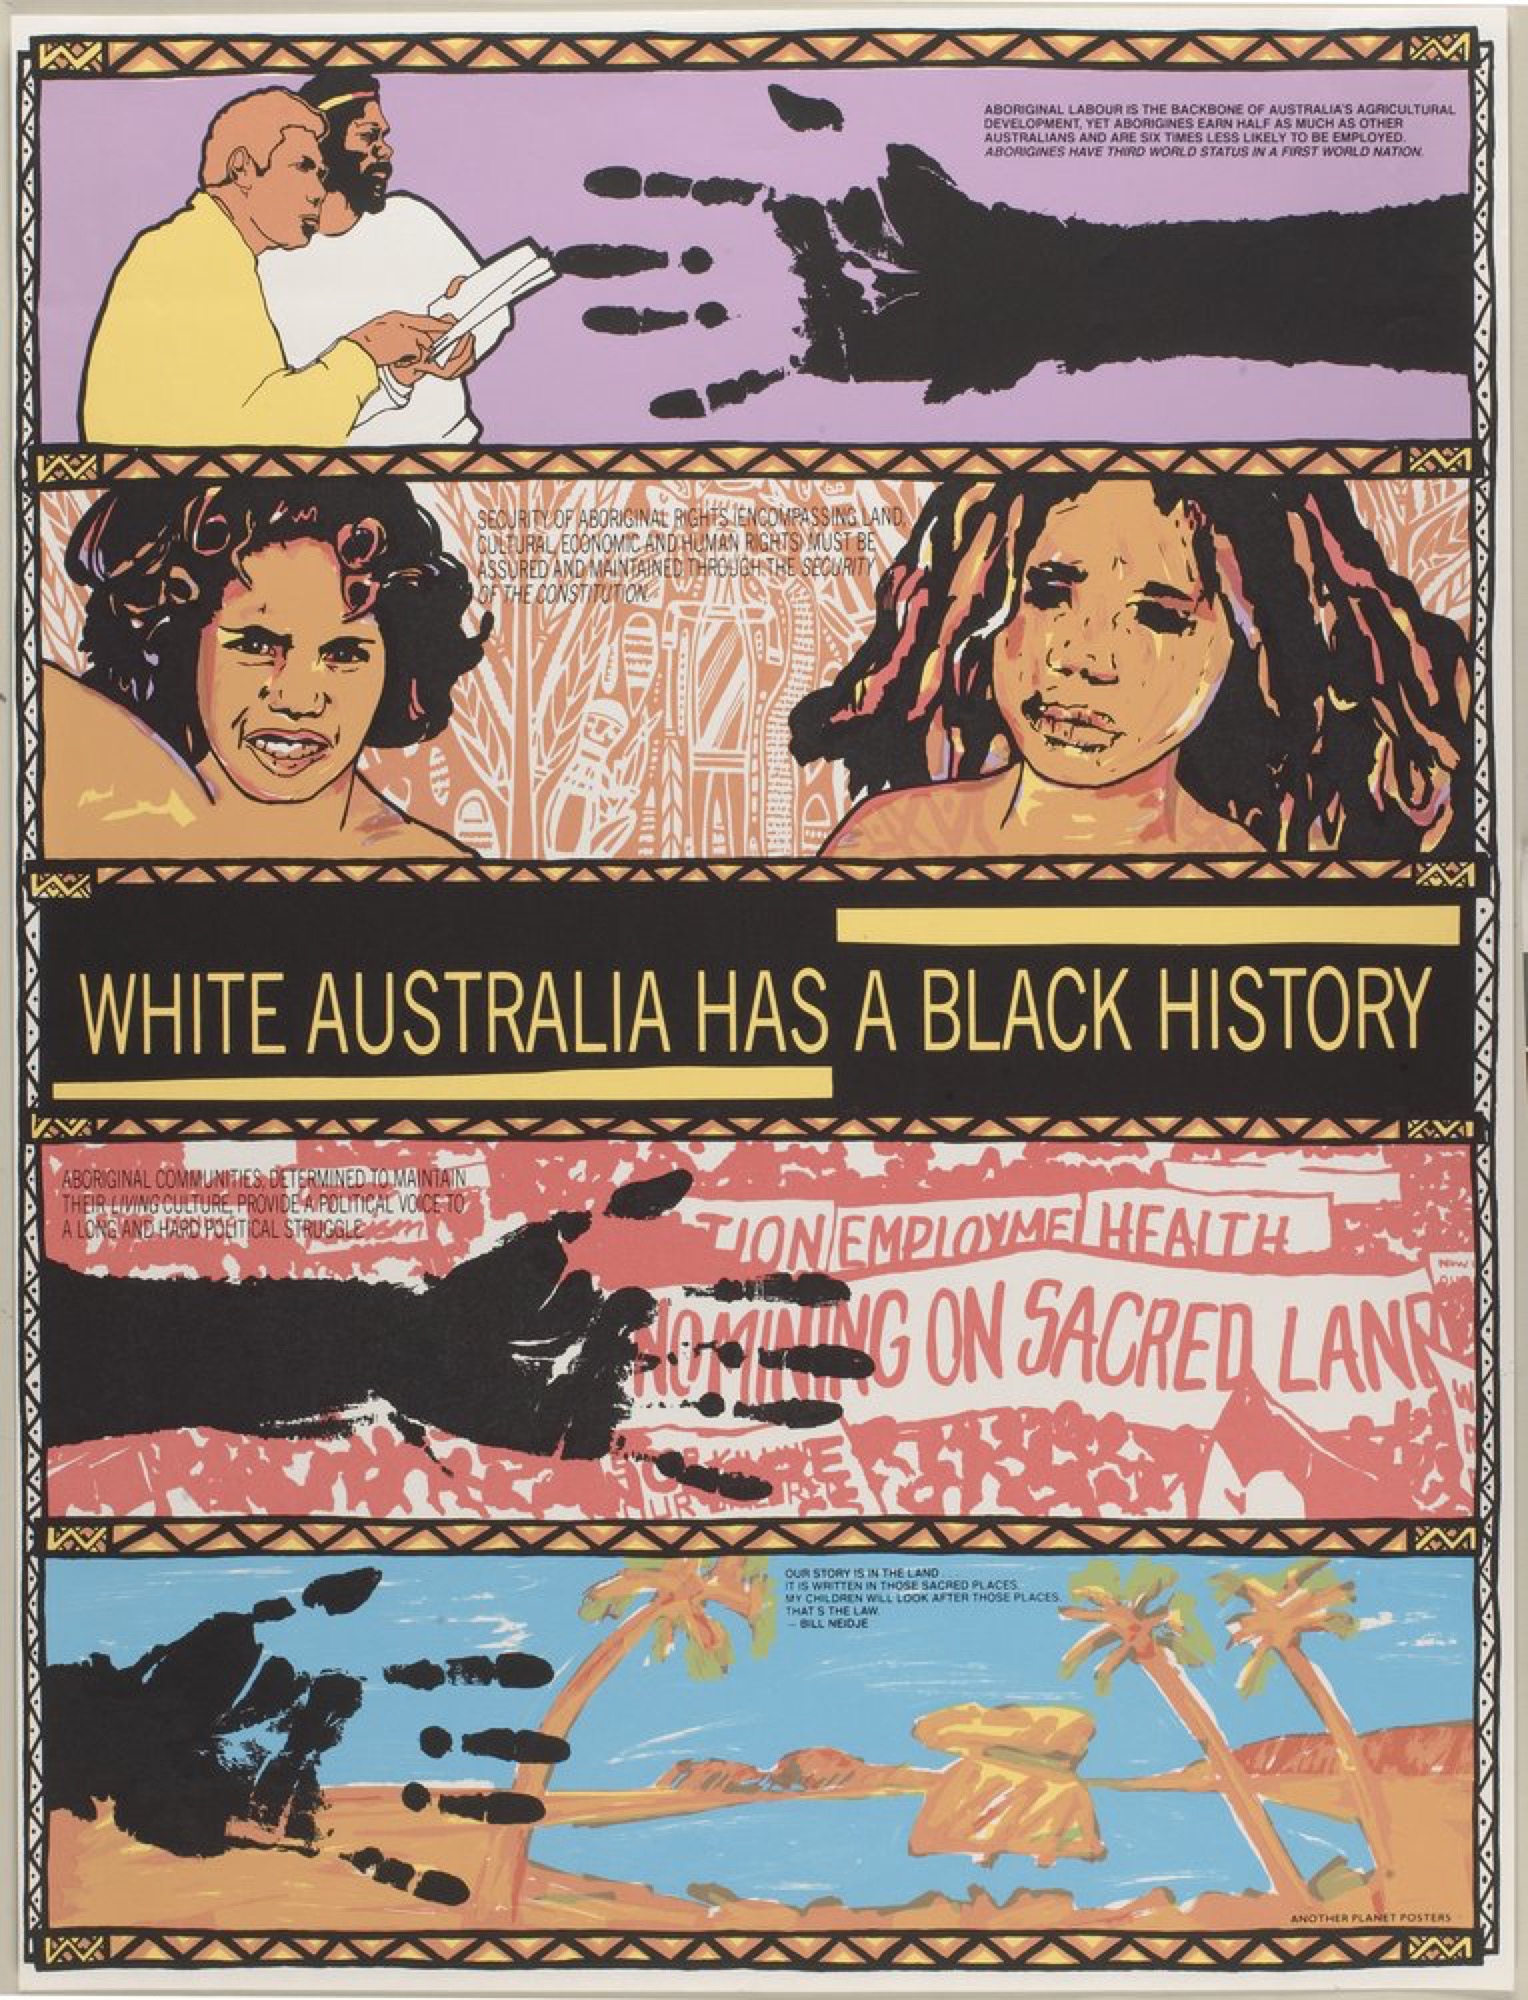 Colin Russell<br />
<em>White Australia has a black history</em>, 1987 colour screenprint.<br />
Courtesy of the State Library of Victoria